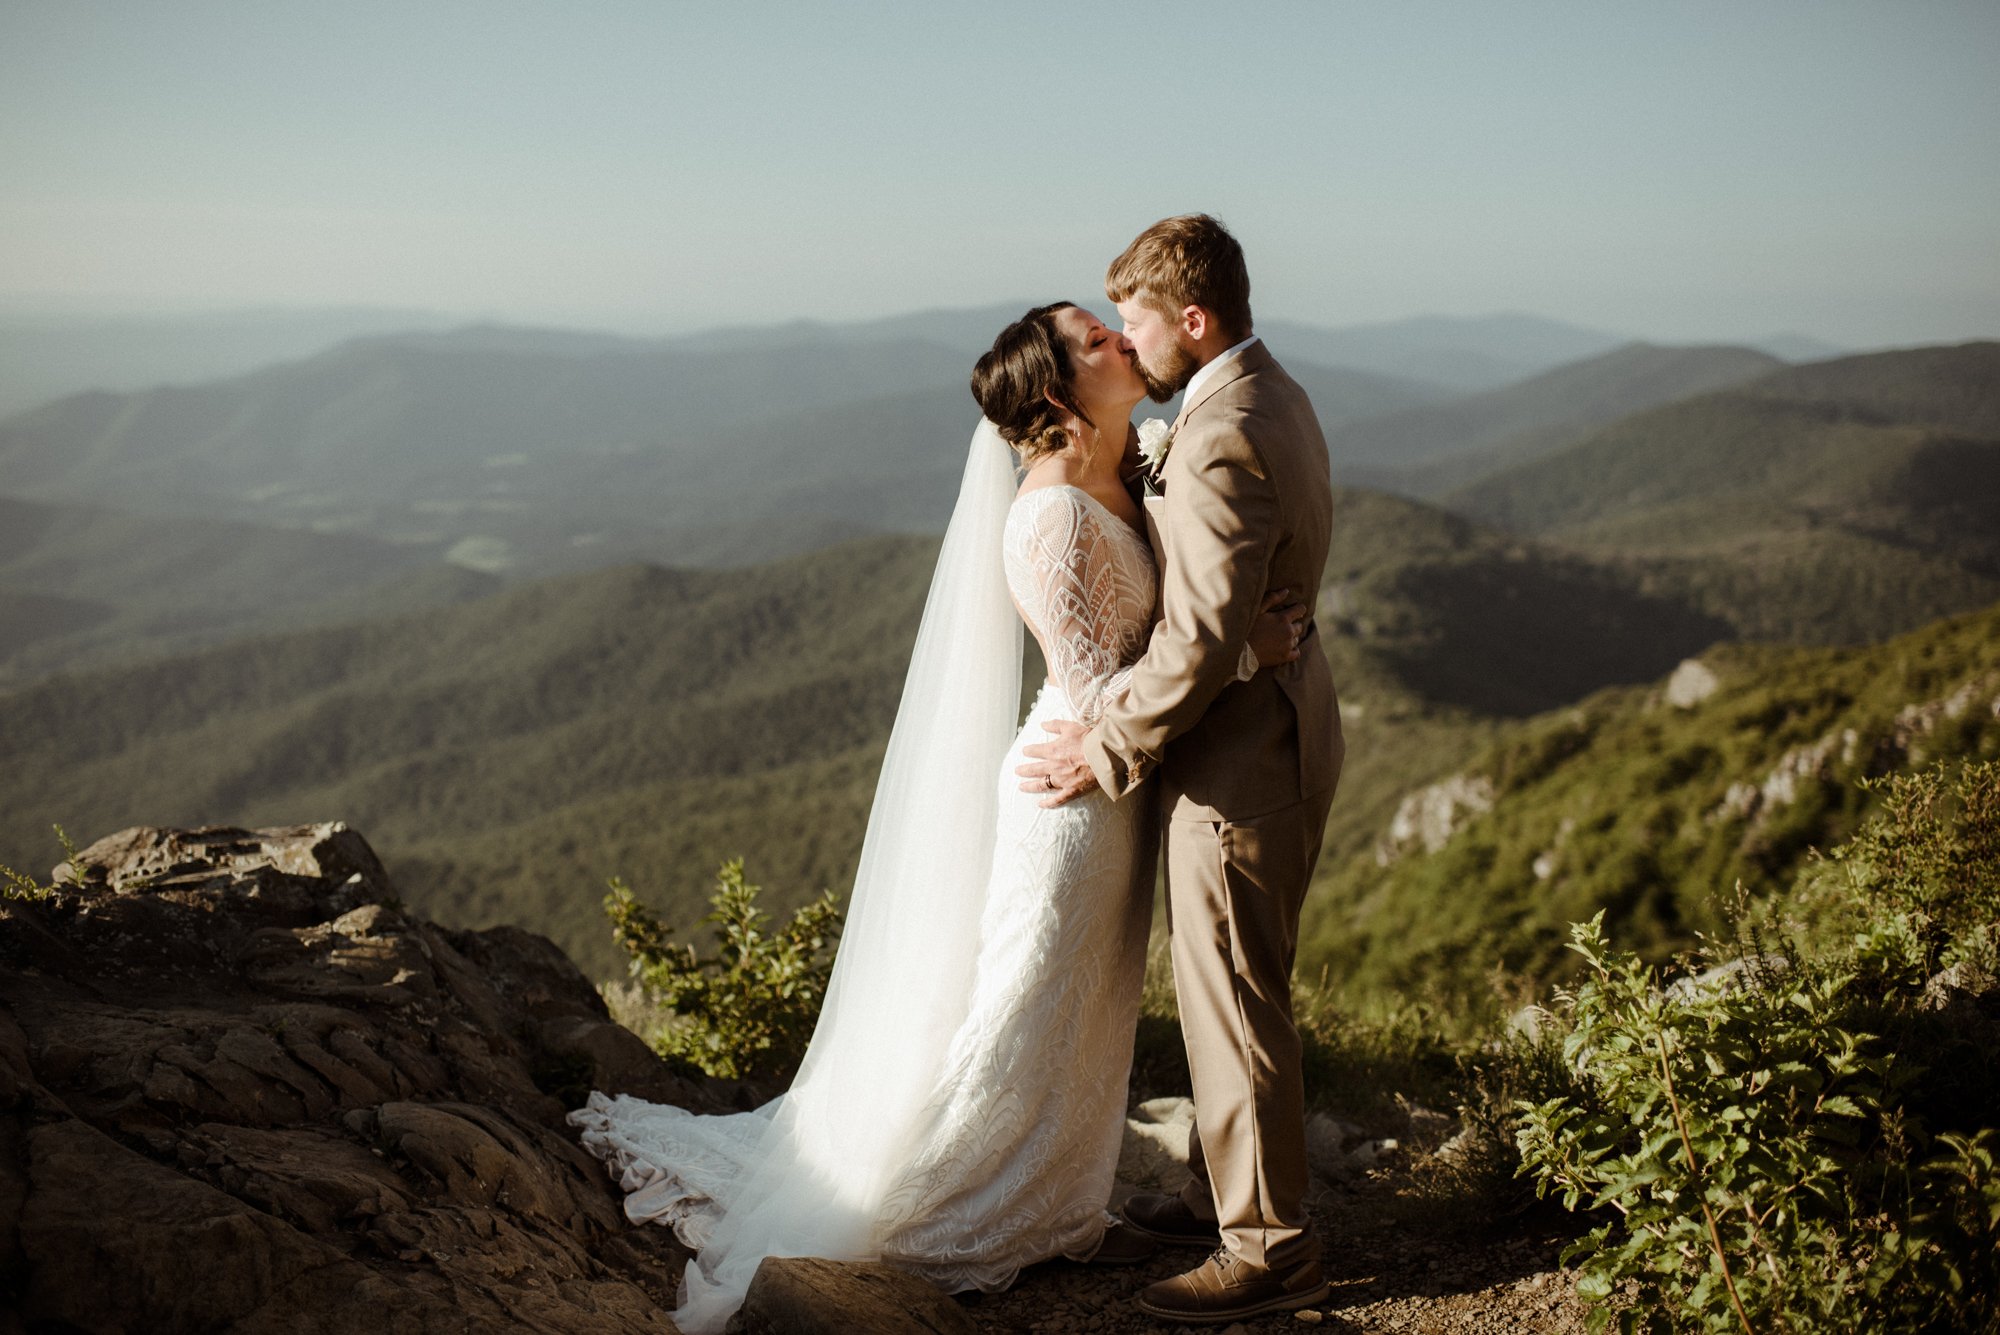 Sunset Elopement on Stony Man Summit in Shenandoah National Park - White Sails Creative Elopement Photography - July Elopement on the Blue Ridge Parkway_35.jpg